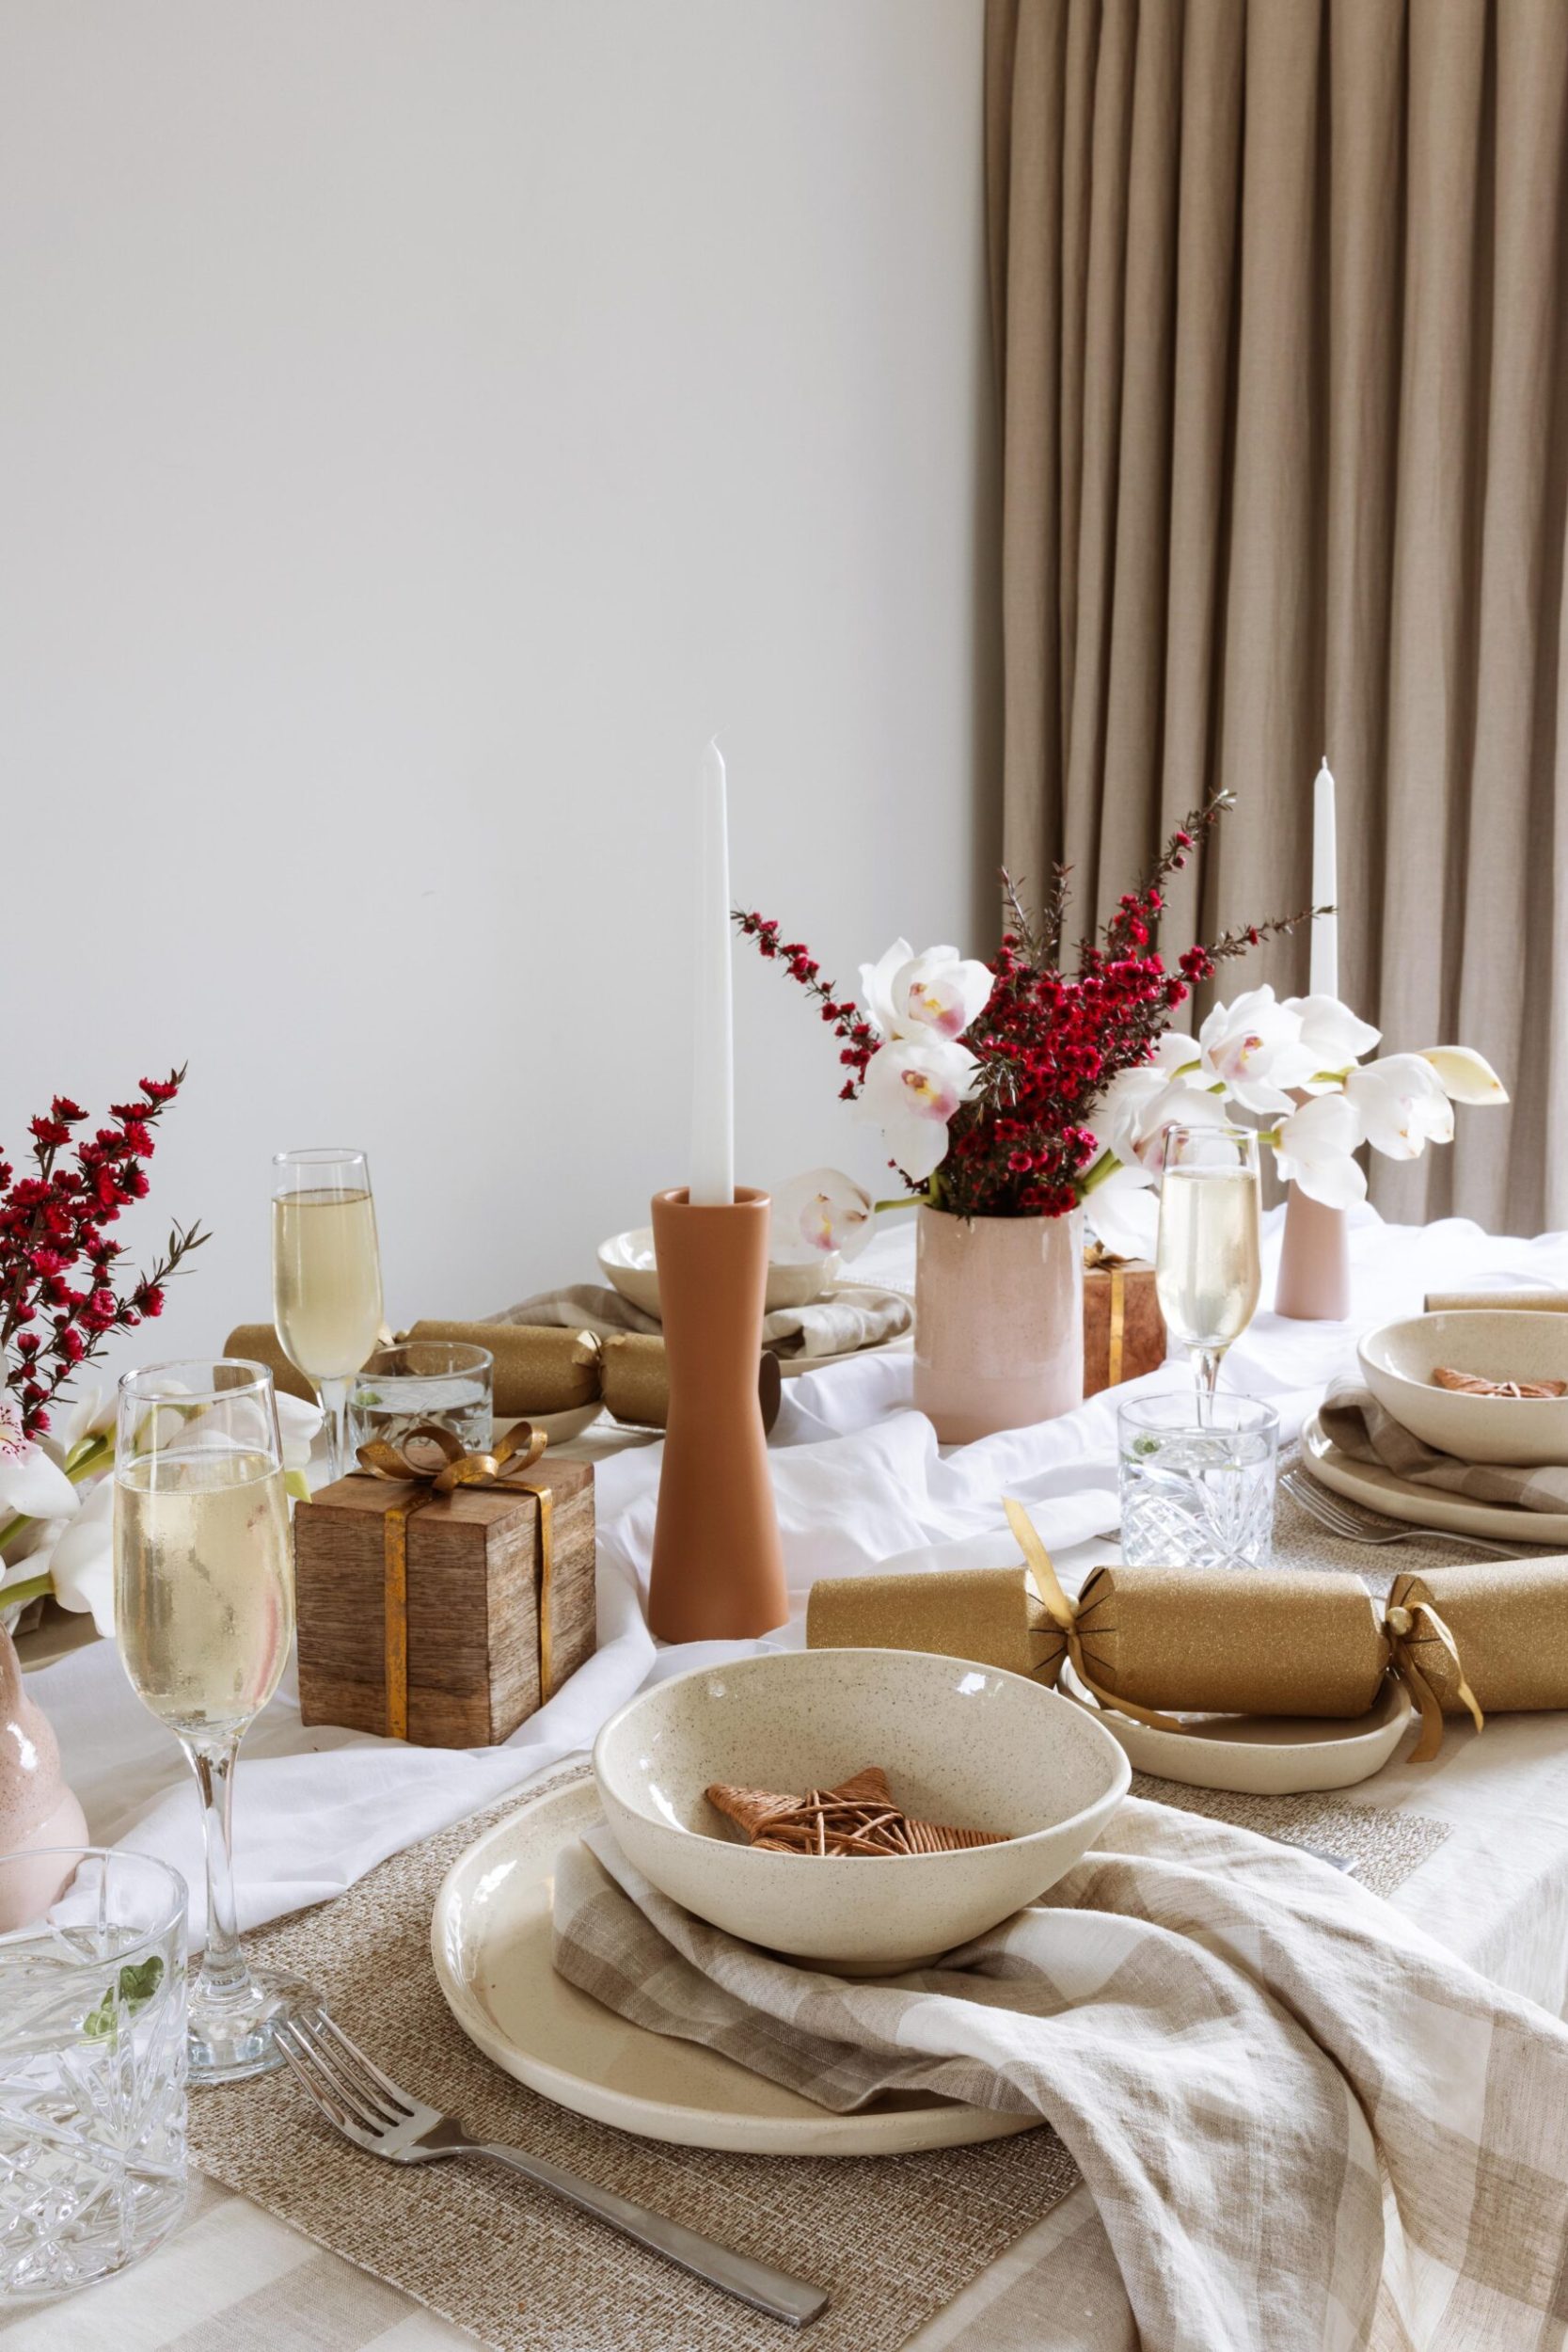 Cherie's dining table dressed for a meal with white and natural linens and terracotta candle holders